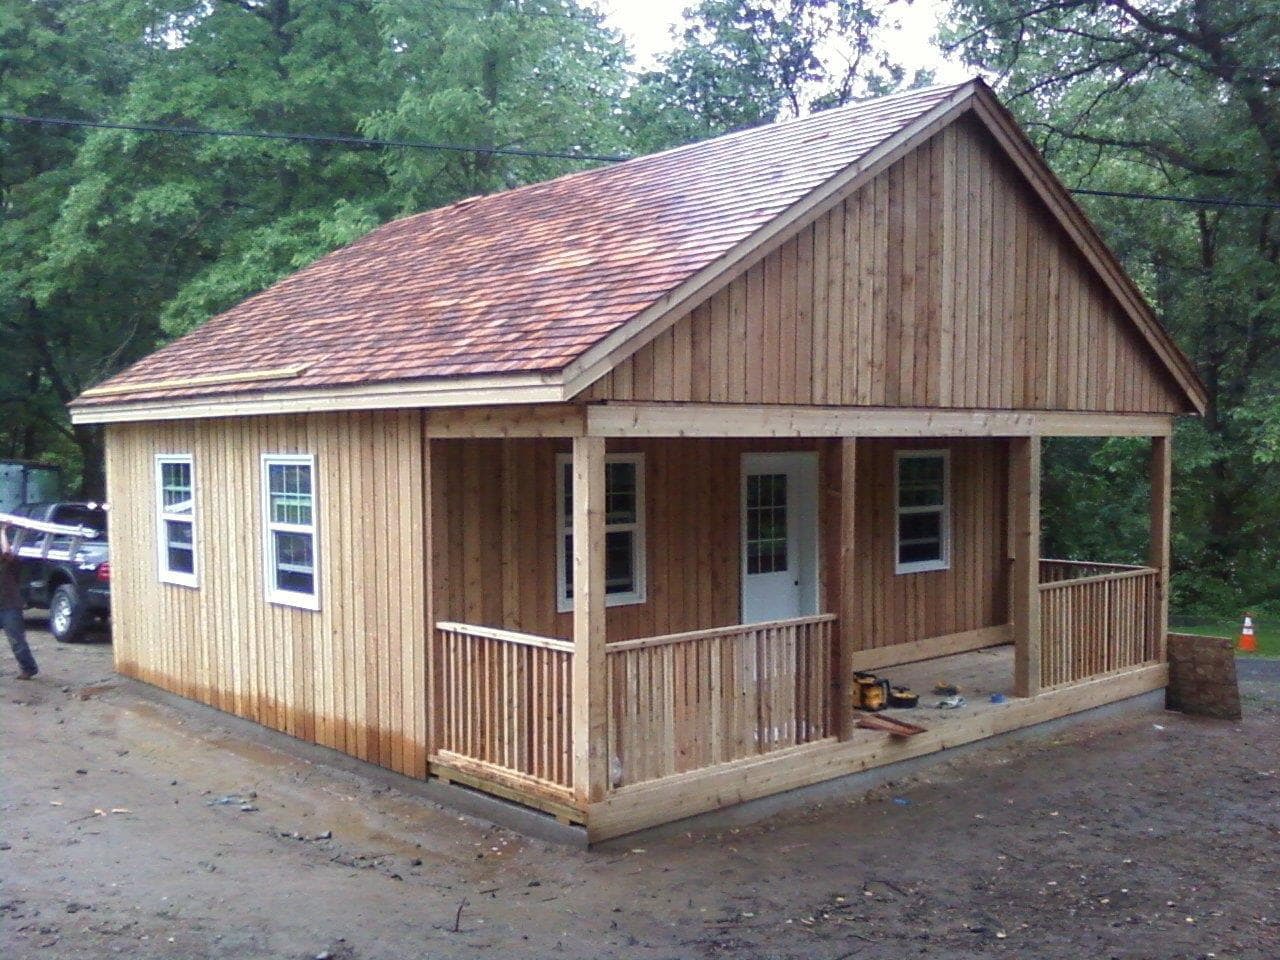 Mountain Brook 24x26 cabins with single hung window in Pearl River New York. ID number 128300-1 